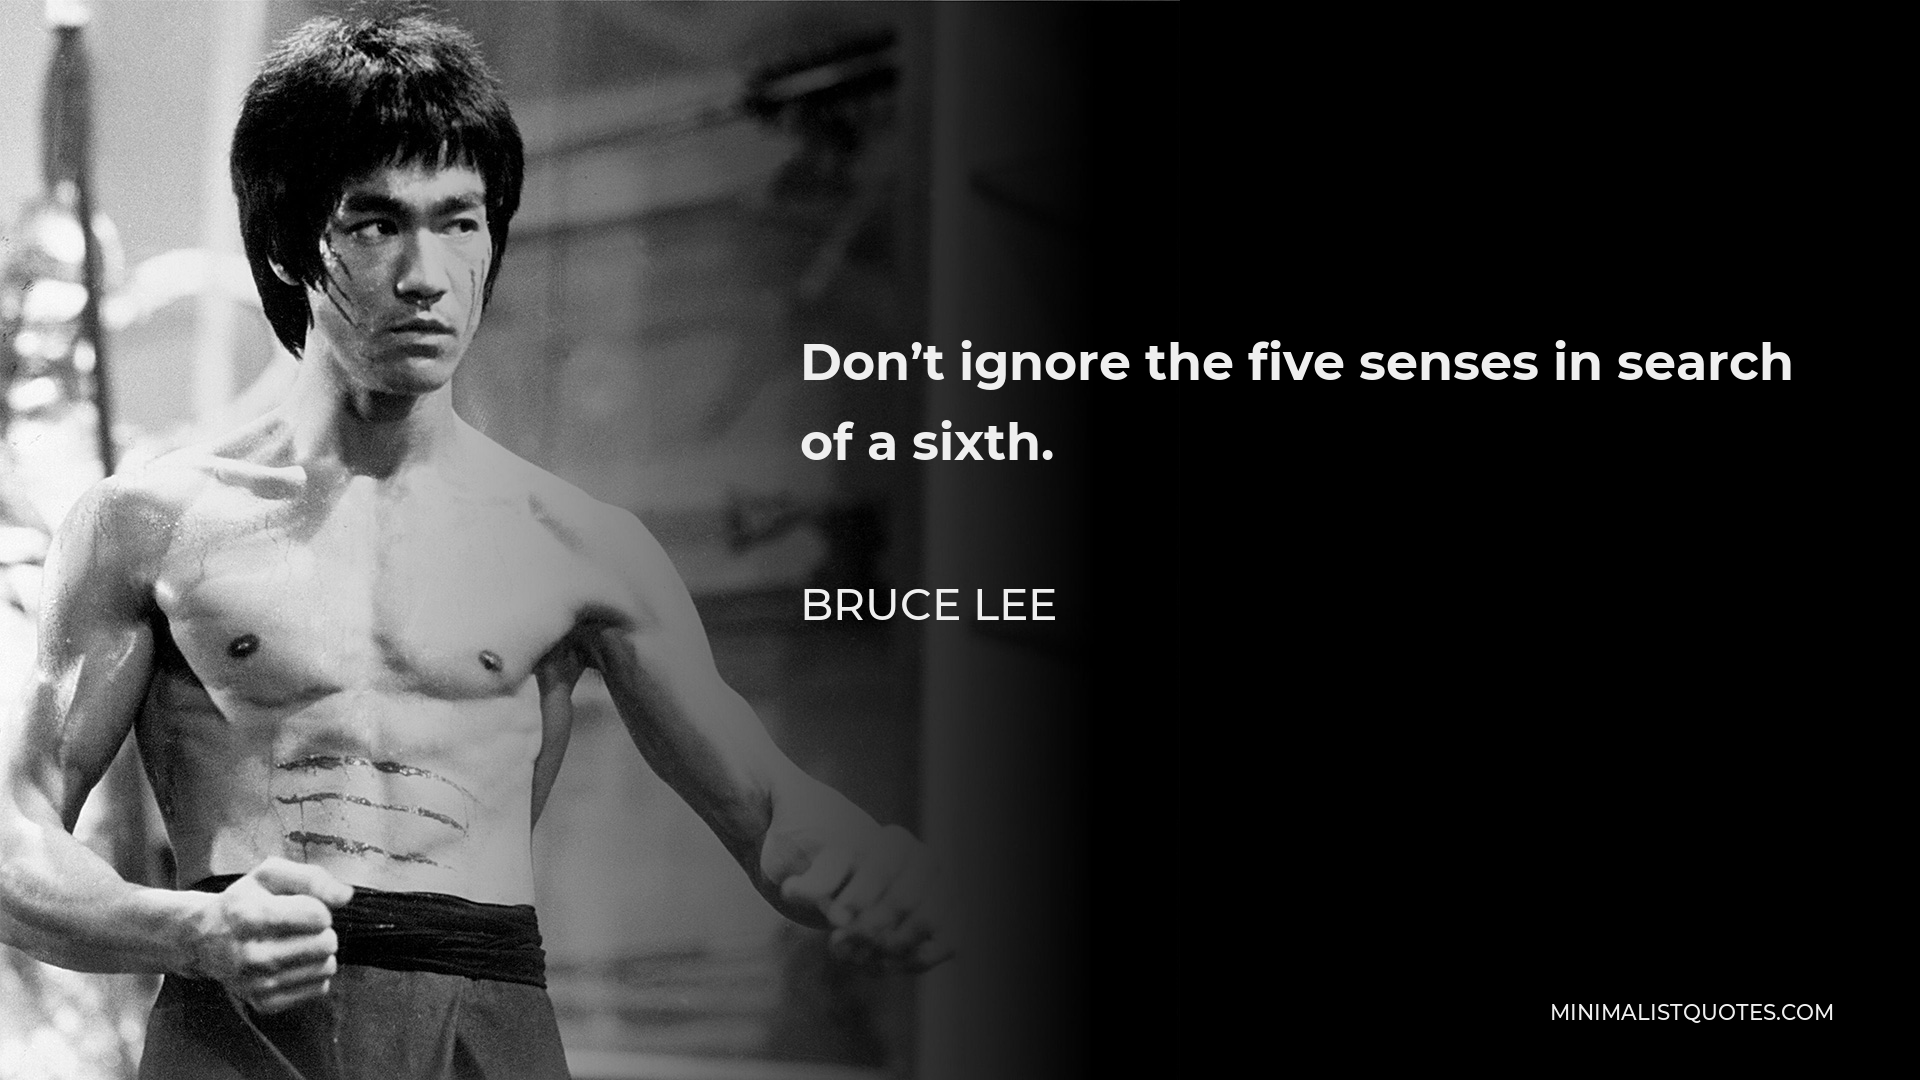 Bruce Lee Quote - Don’t ignore the five senses in search of a sixth.